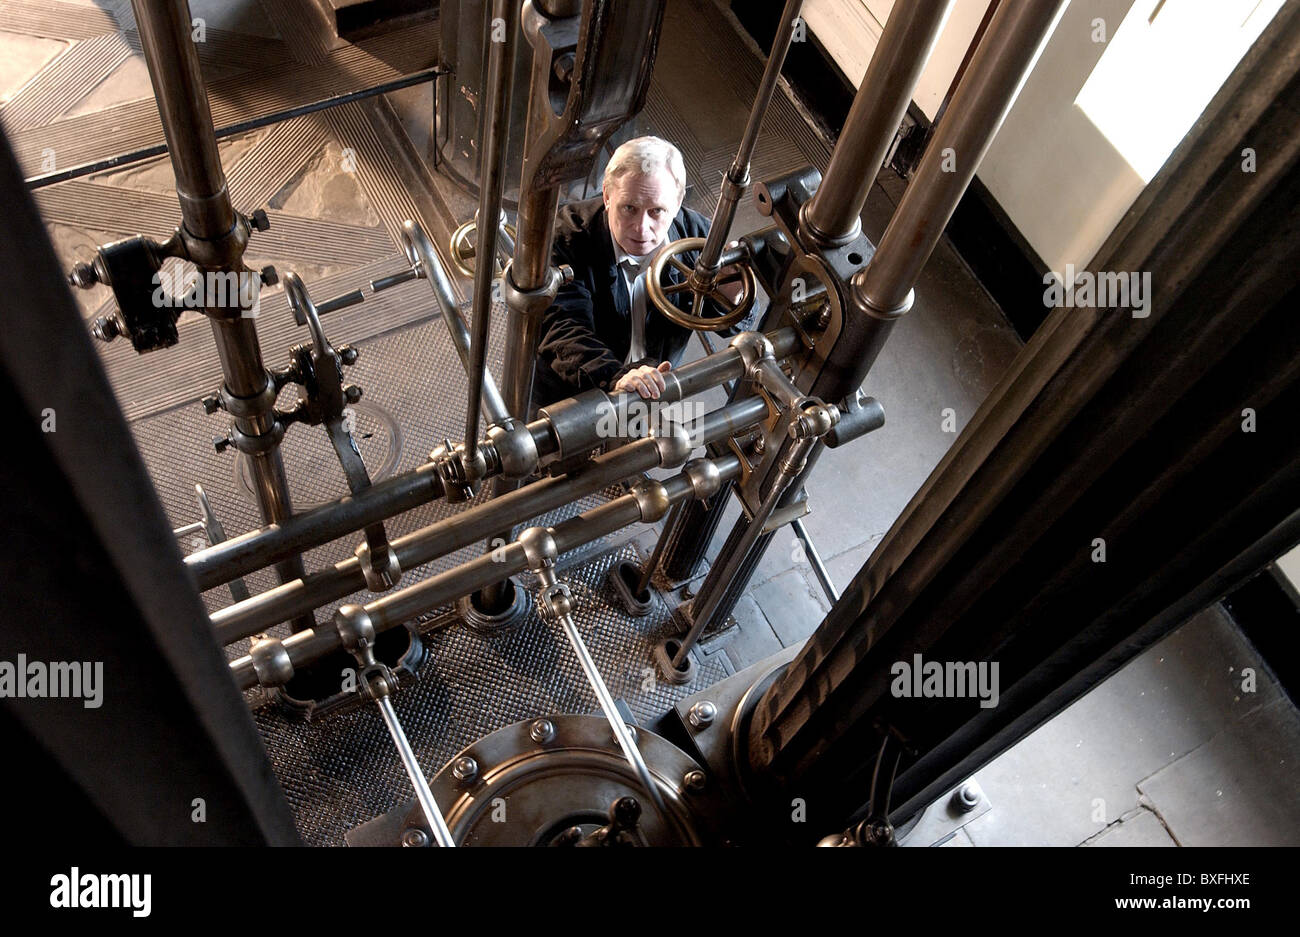 The World's largest single cylinder beam engine, the 1846 Grand Junction 90 inch engine at Kew Bridge Steam Museum Stock Photo